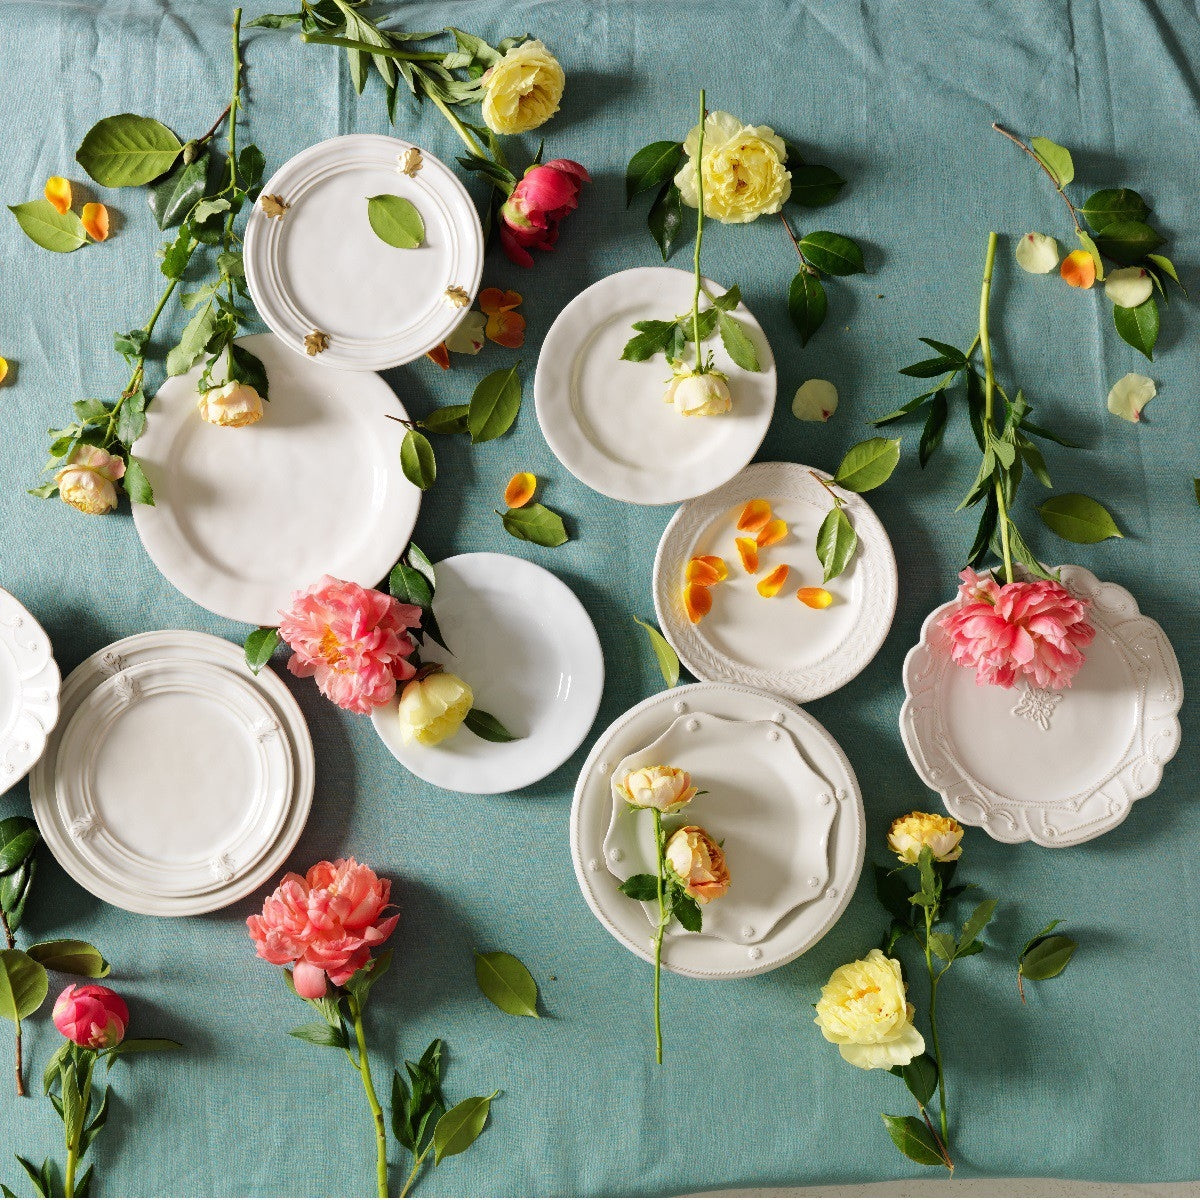 juliska plates scattered on a teal tablecloth surrounded by flowers